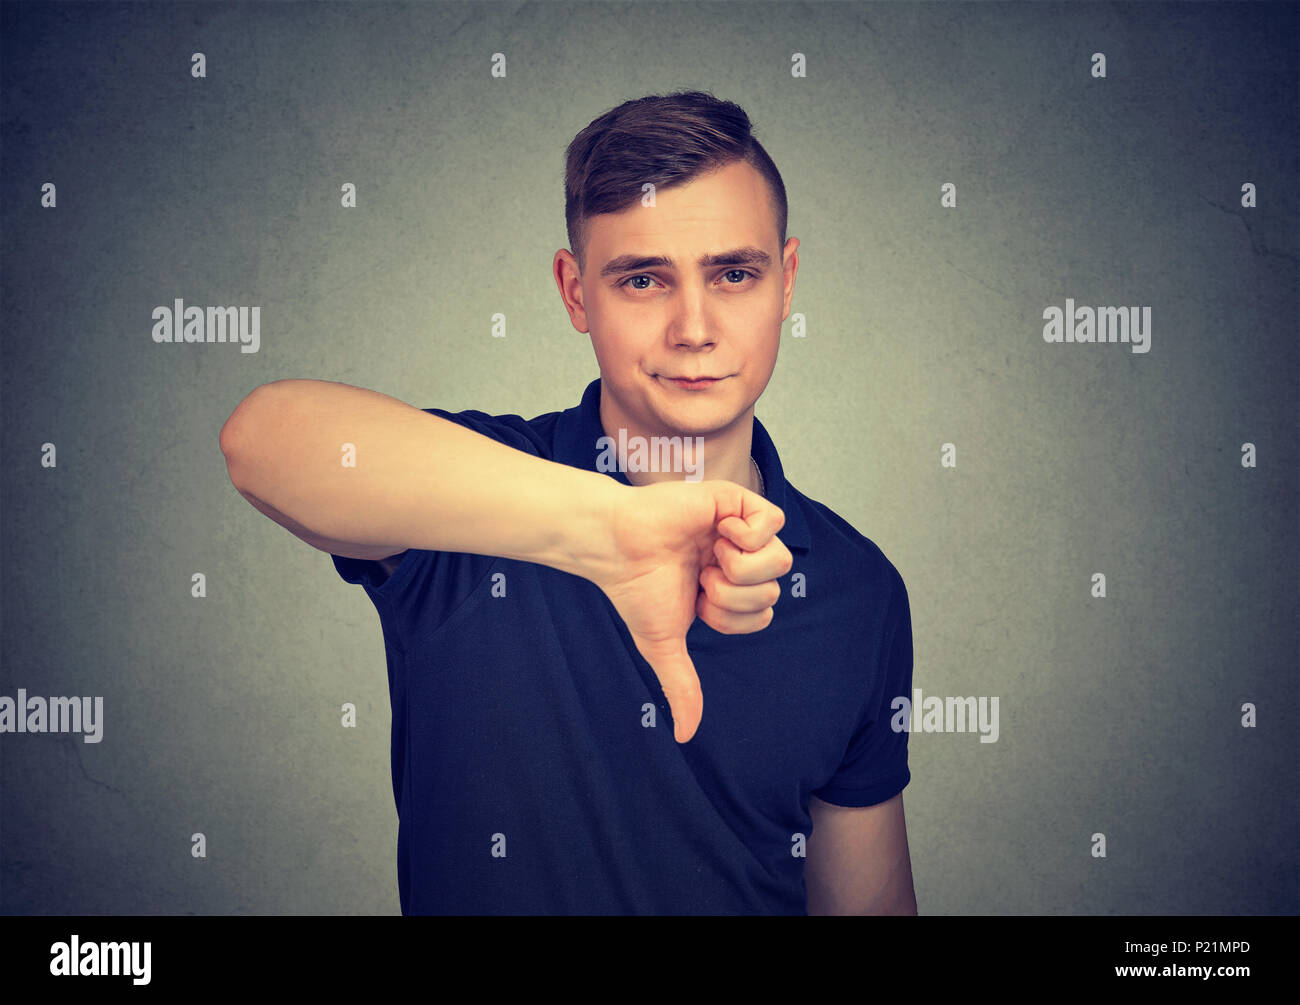 Man showing thumb down hand gesture Banque D'Images